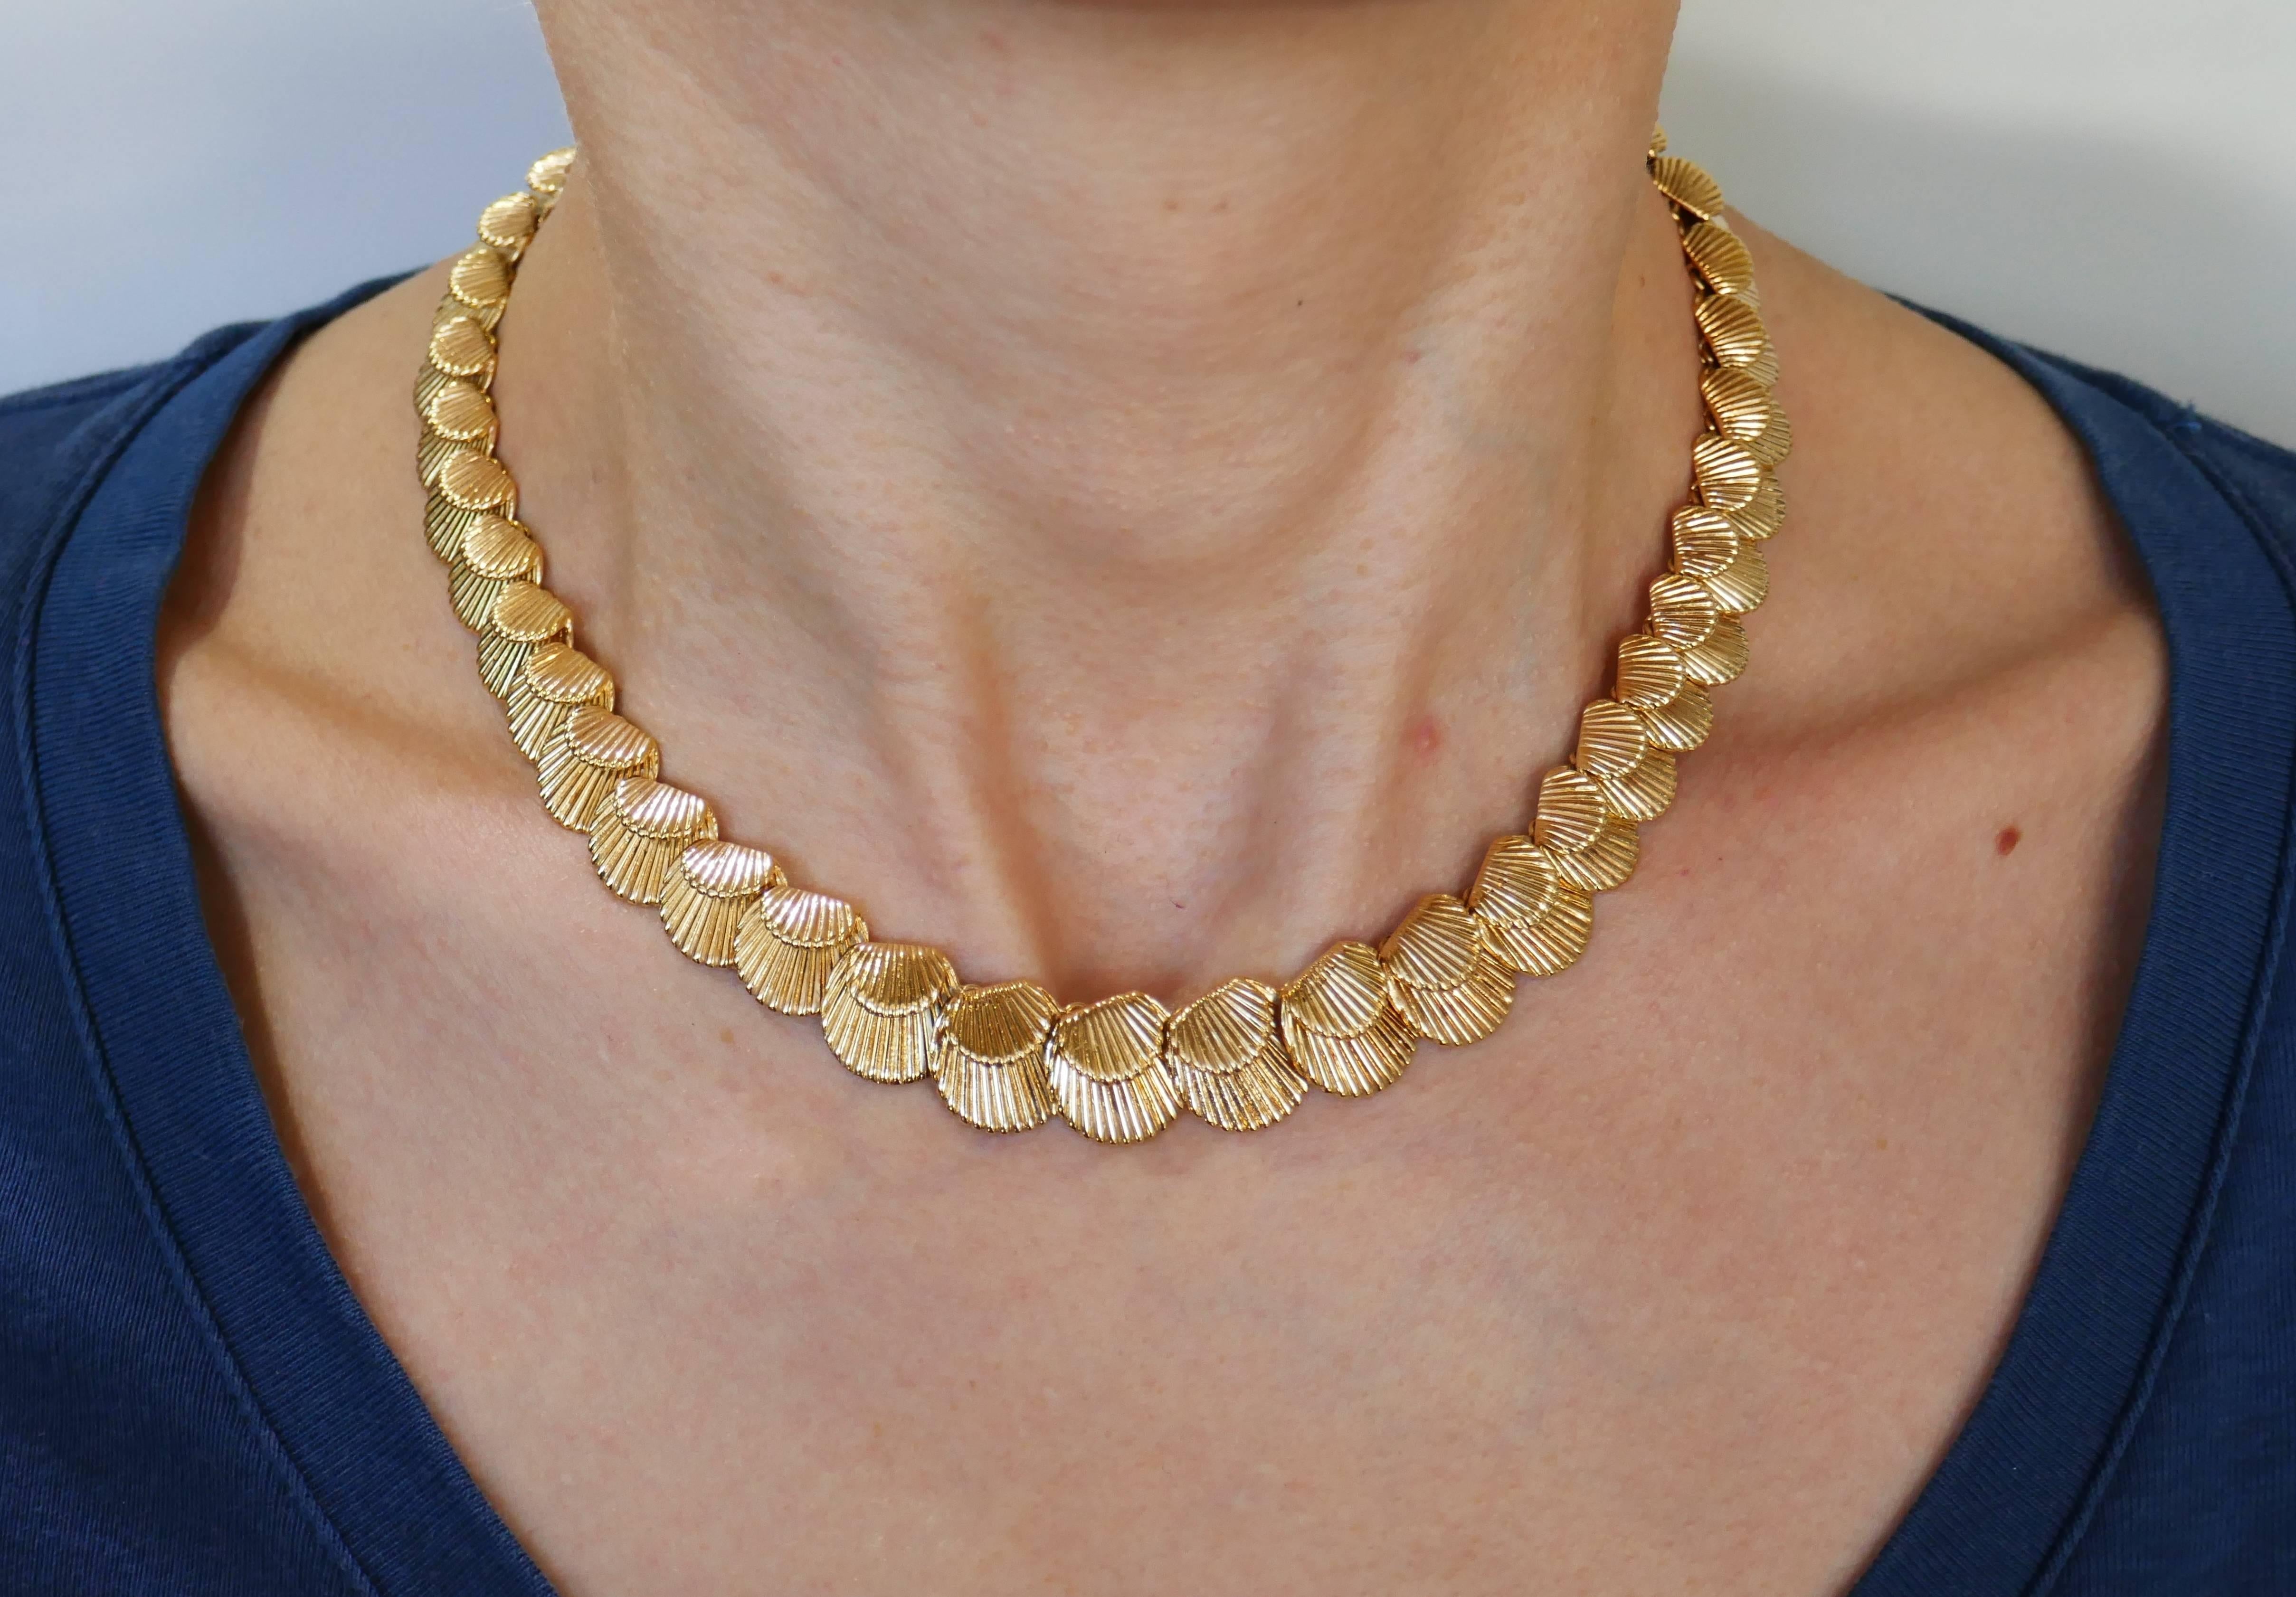 Elegant vintage seashell necklace created in France in the 1950s. Feminine and wearable, the necklace is a great addition to your jewelry collection.  
The necklace is made of 18 karat yellow gold. 
It is 15-1/4 inches (38.5 cm) long and width is